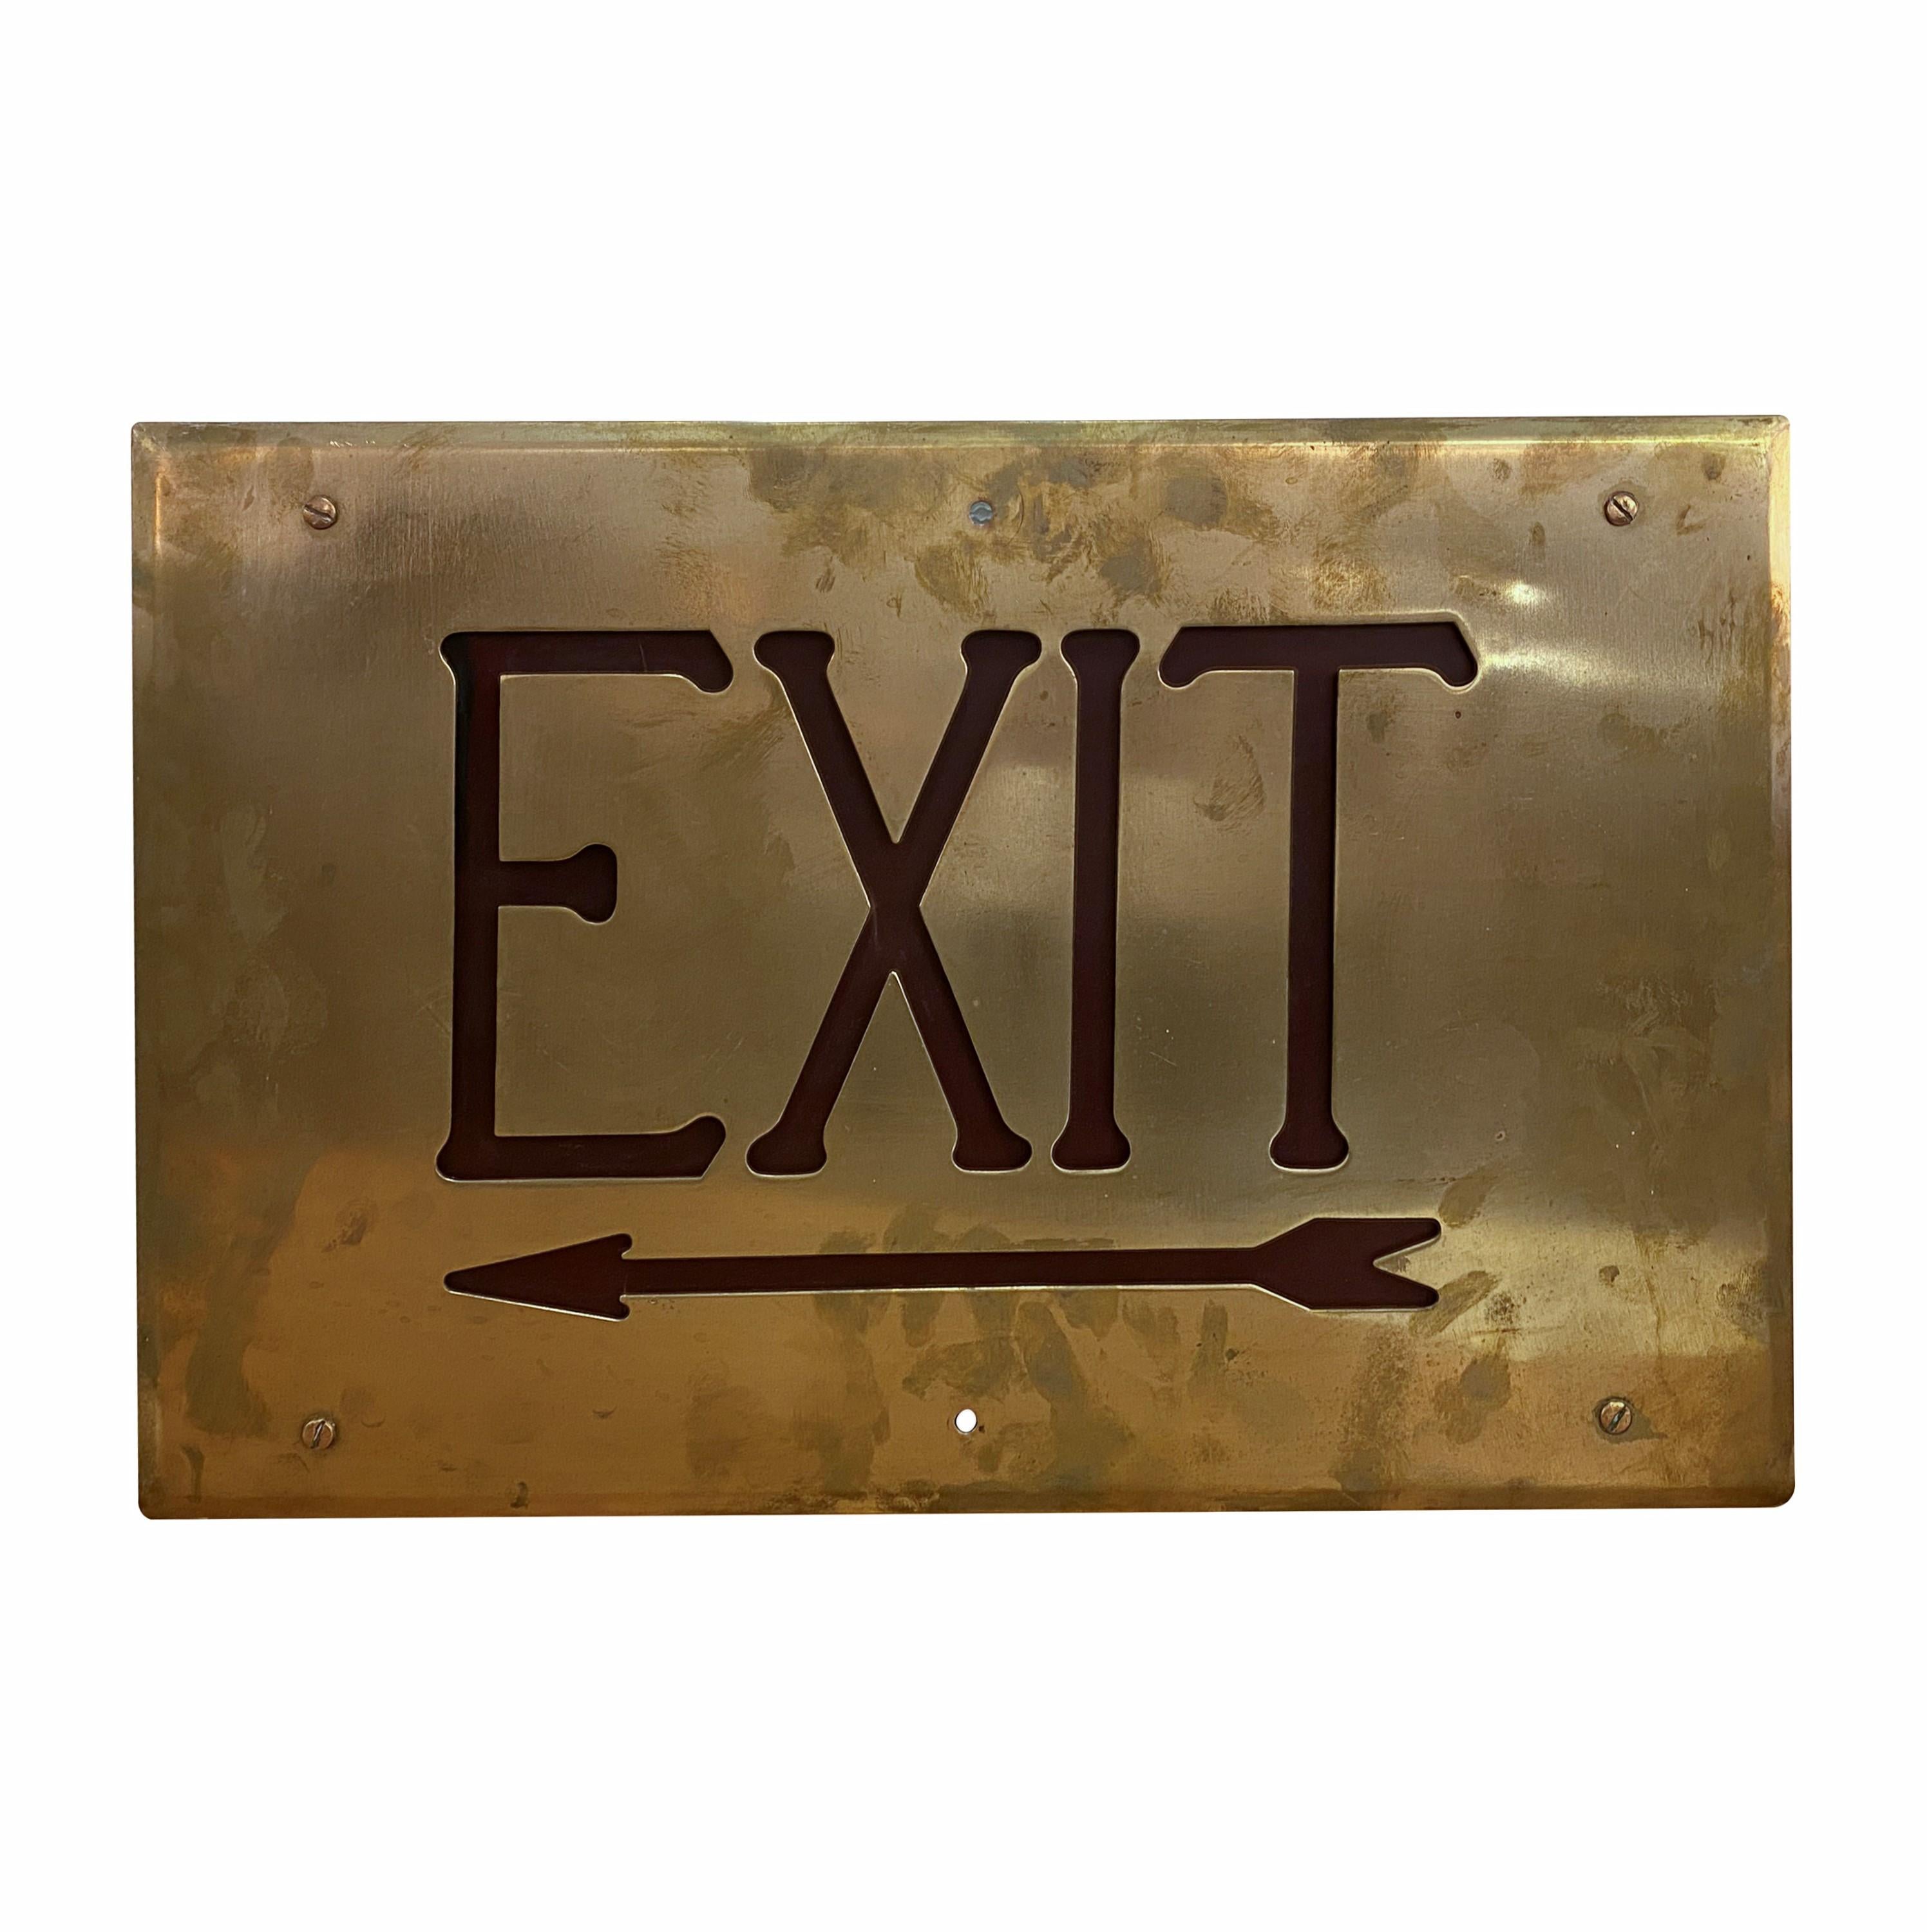 This antique brass beveled border exit faceplate sign features red glass letters, exuding timeless elegance. This piece serves as a sophisticated and eye catching directional accent in any space. It is in good condition without any major scratches